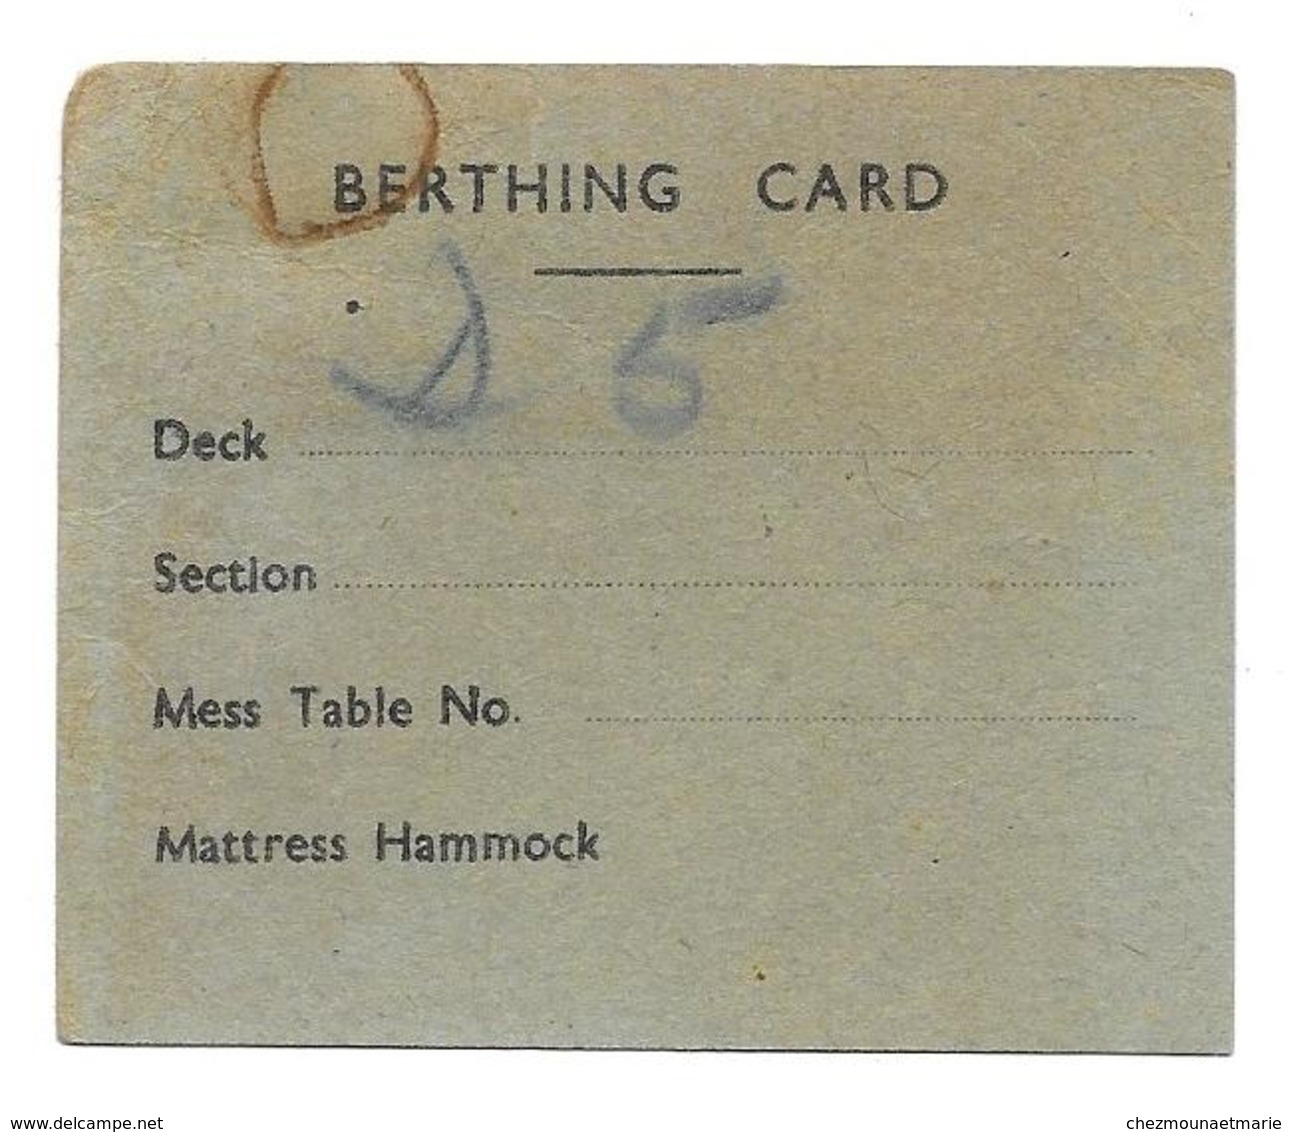 BERTHING CARD - N°5 BOAT DECK AFT N°3 HATCH - FIRE STATION BOAT SATATION - MILITAIRE - Boats